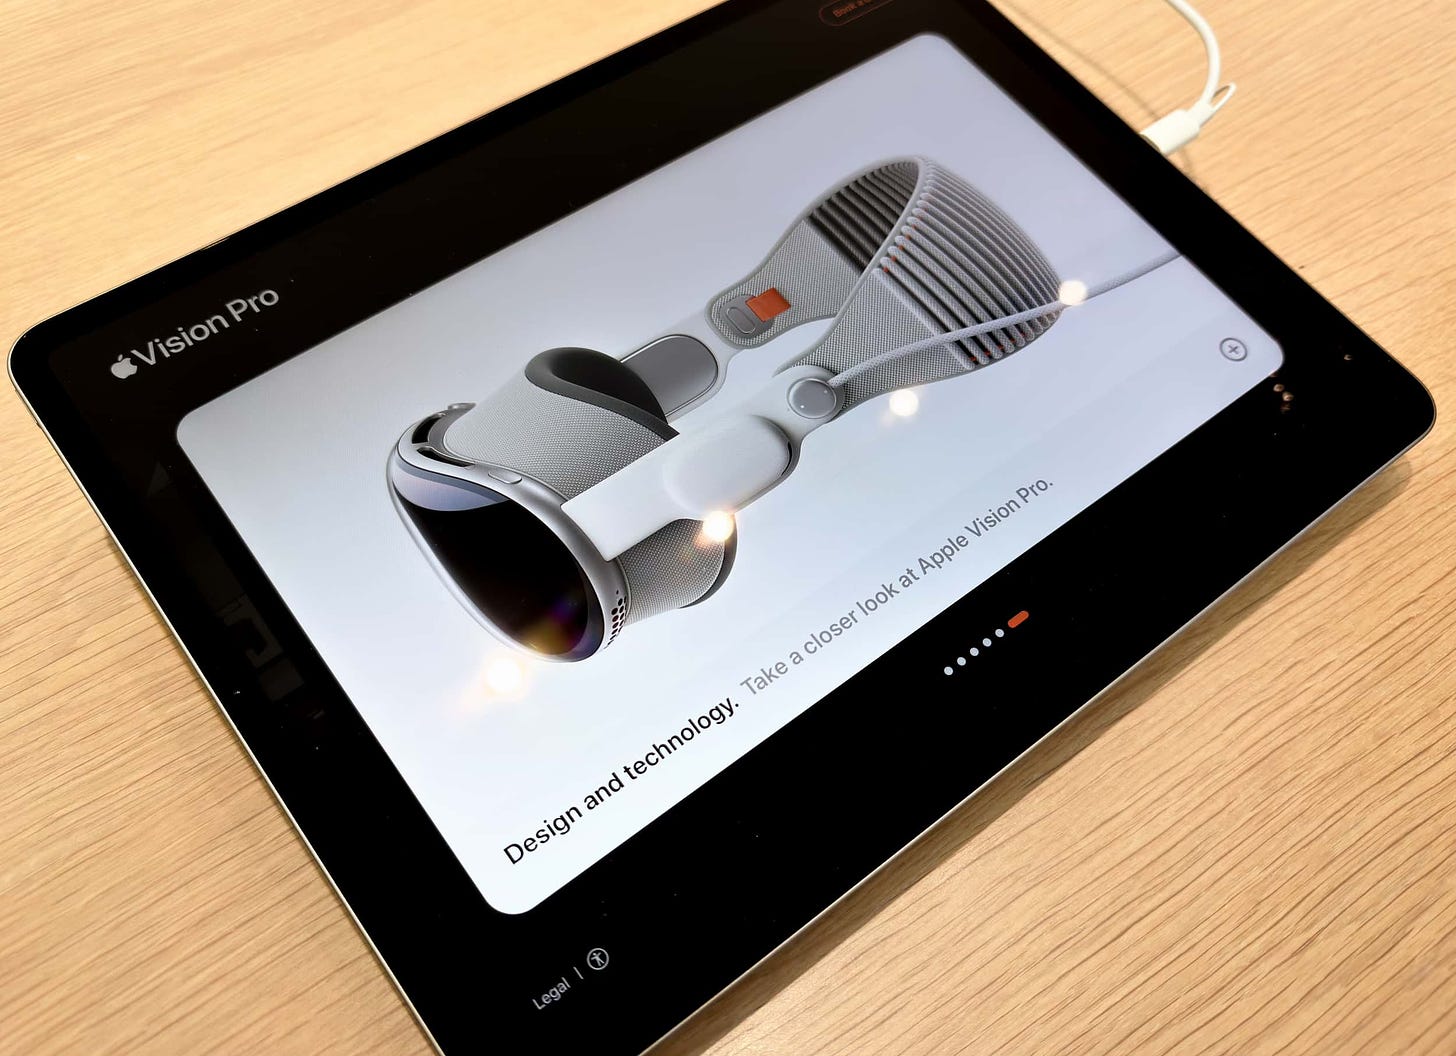 The Explore app for Apple Vision Pro running on an iPad.